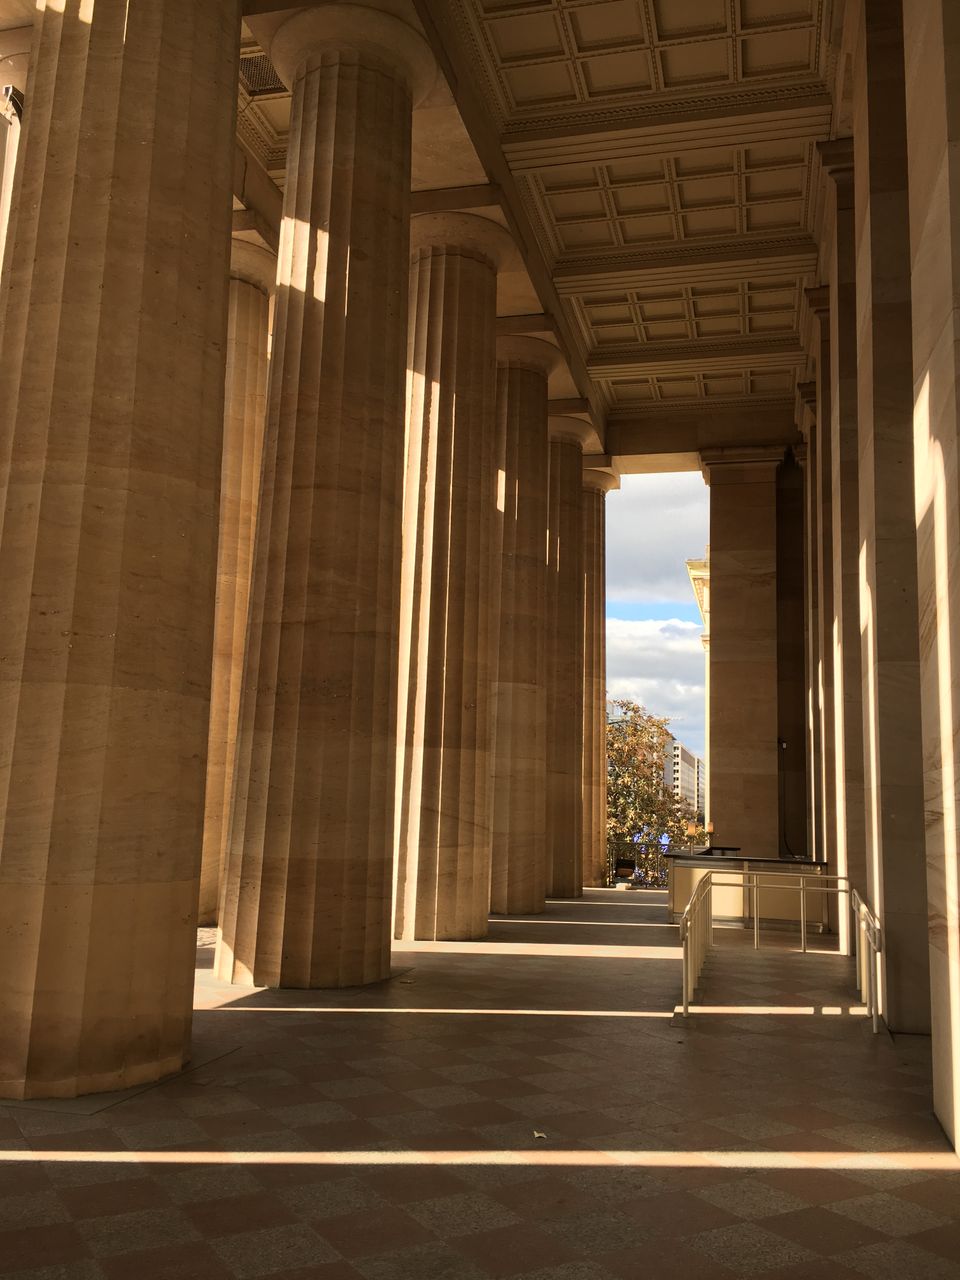 This is a photo inside the outdoor Portico at the Smithsonian American Art Museum.